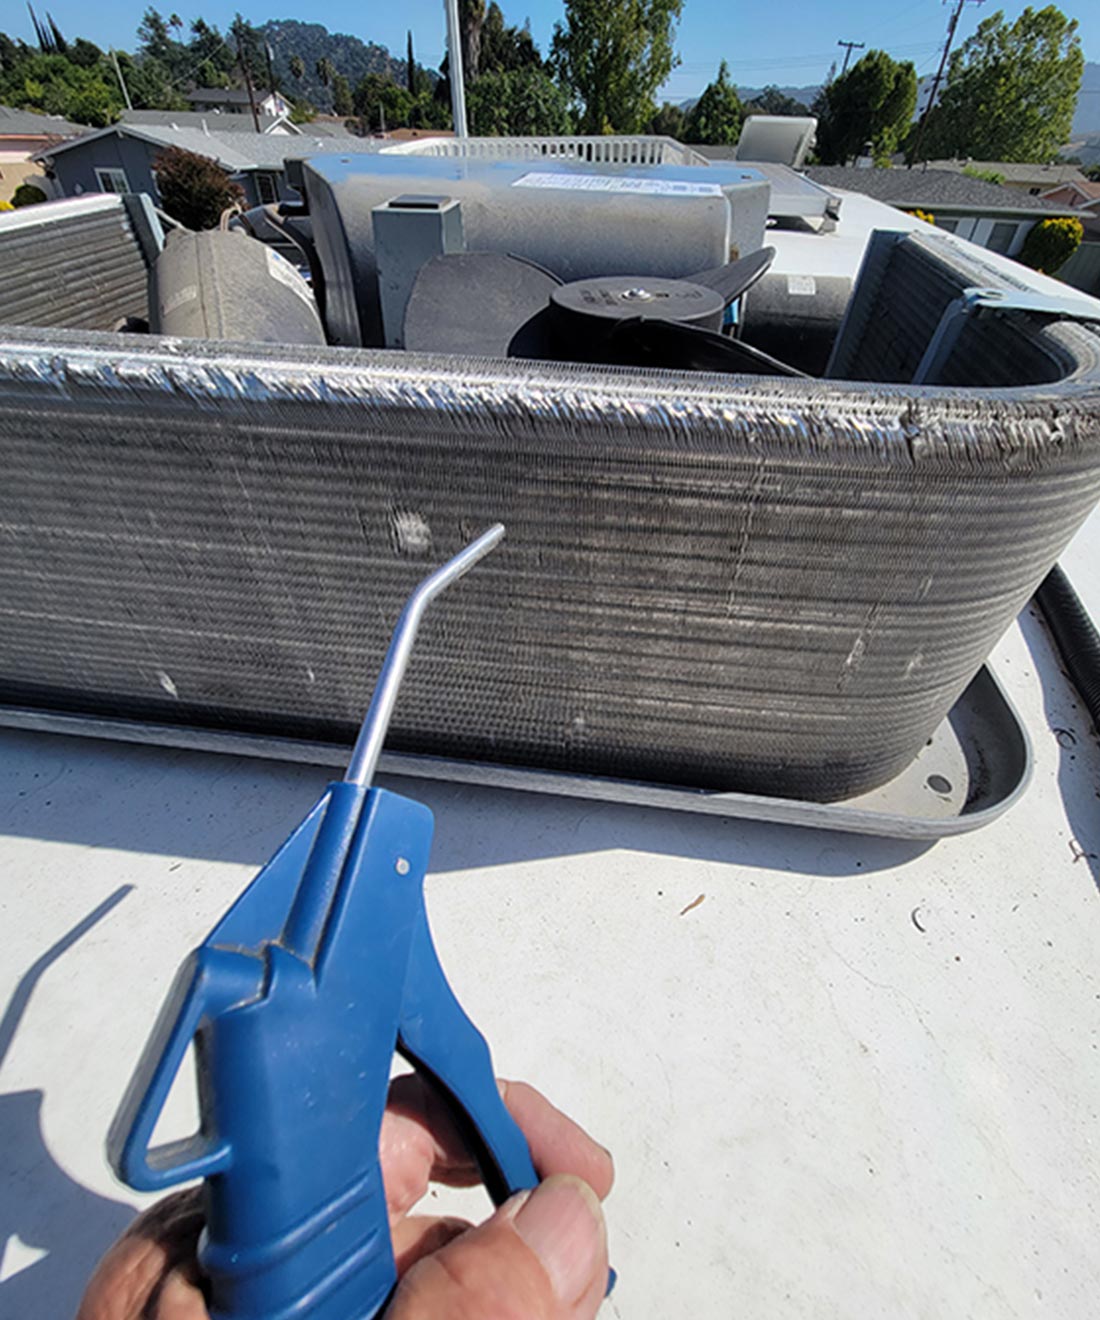 with the bulk of debris is removed, compressed air through an air gun is directed to the condenser coils (no closer than 8-10 inches) to blow away the remaining dust and dirt